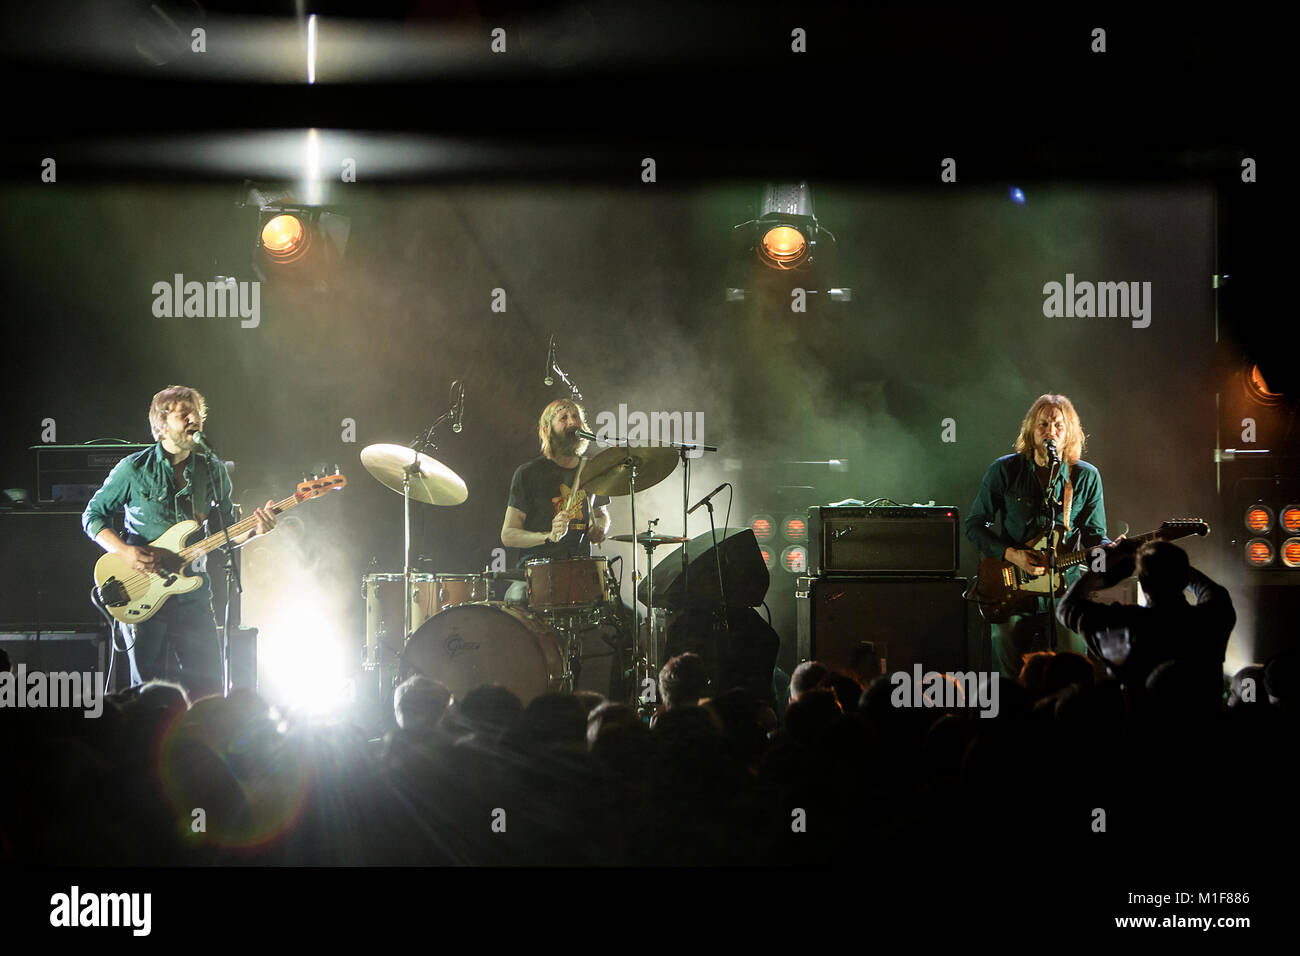 The Norwegian rock band BigBang performs a live concert at USF Verftet in Bergen. Norway, 18/12 2014. Stock Photo